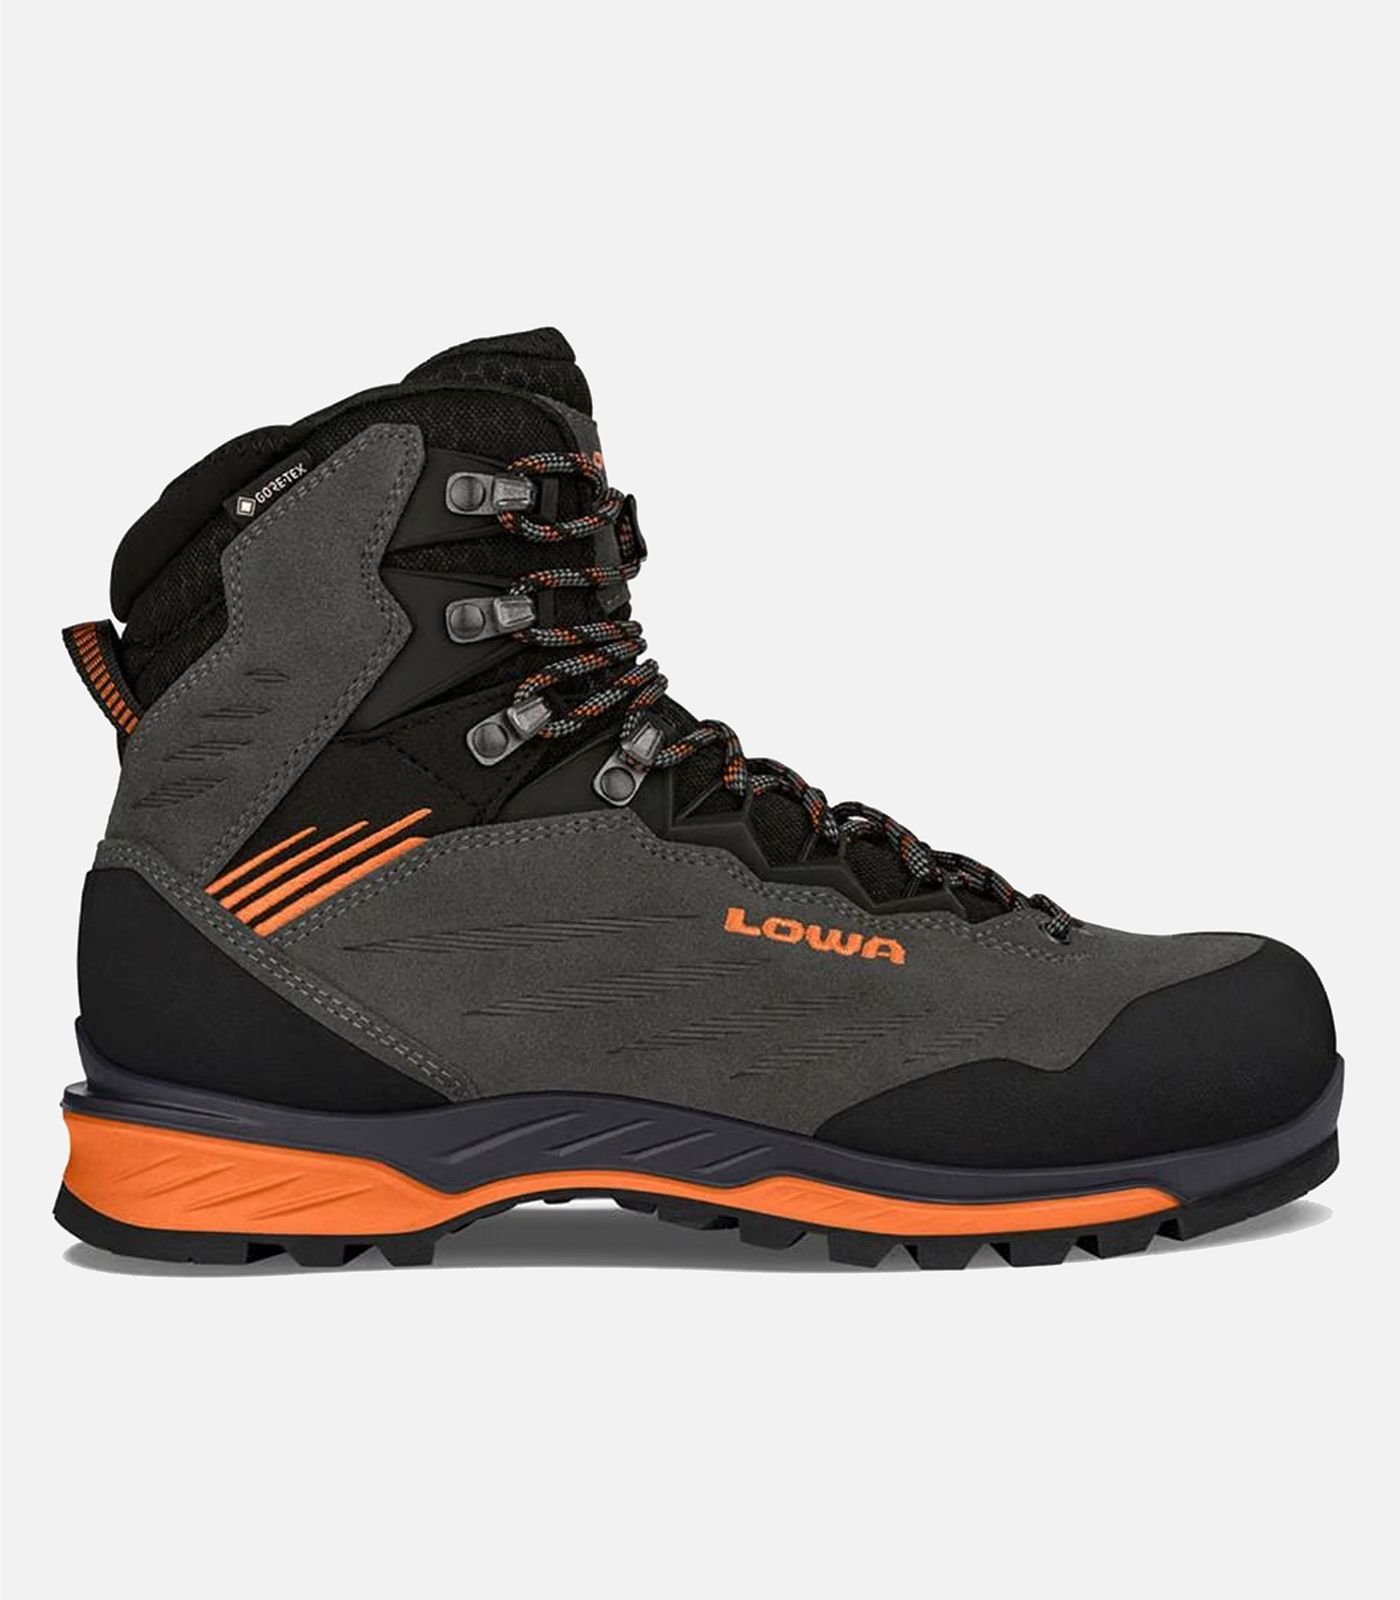 Lightweight mountaineering shoes compatible with crampons.